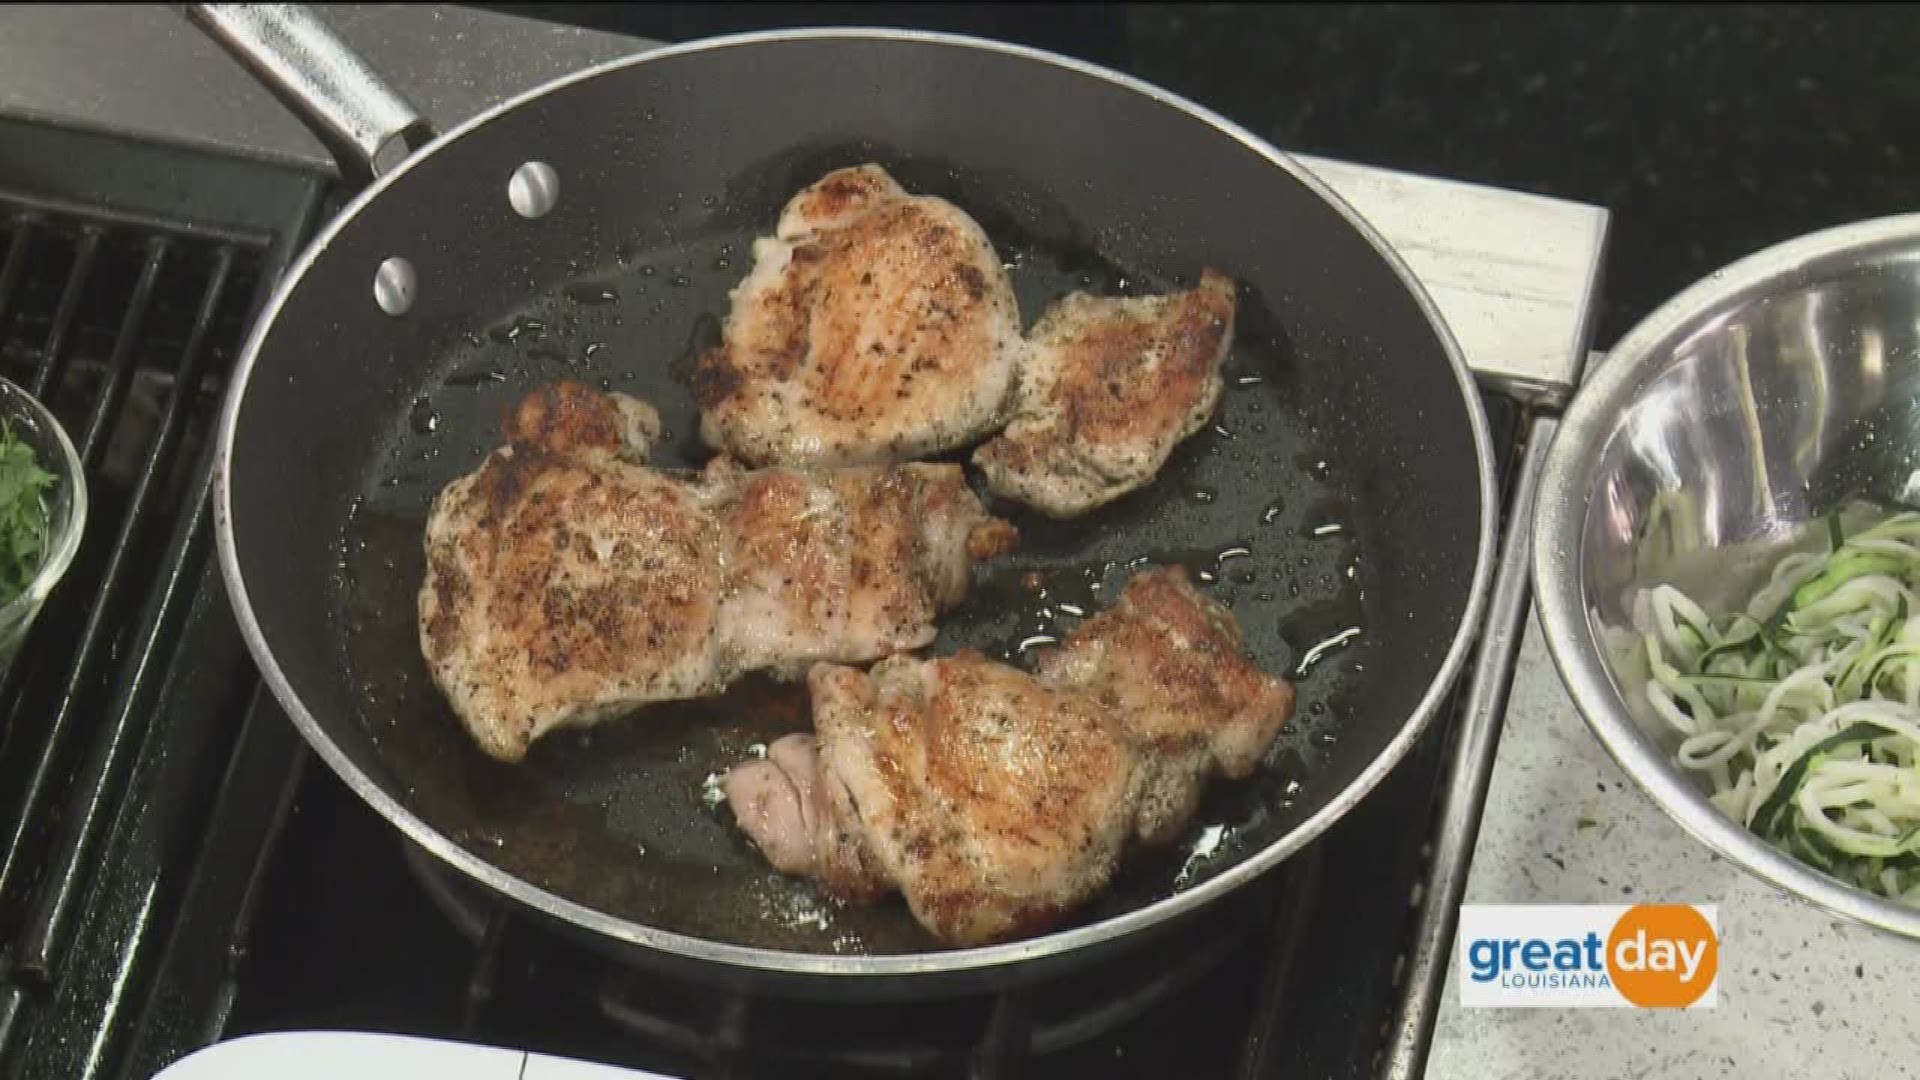 Juggling back to school with your busy work schedule and kids' after school activities may leave you short on time for packing healthy lunches. Chef Kevin joins us in the Great Day kitchen to show us a variety of uses for rotisserie chicken when your short on time, but don't want to be short on flavor.